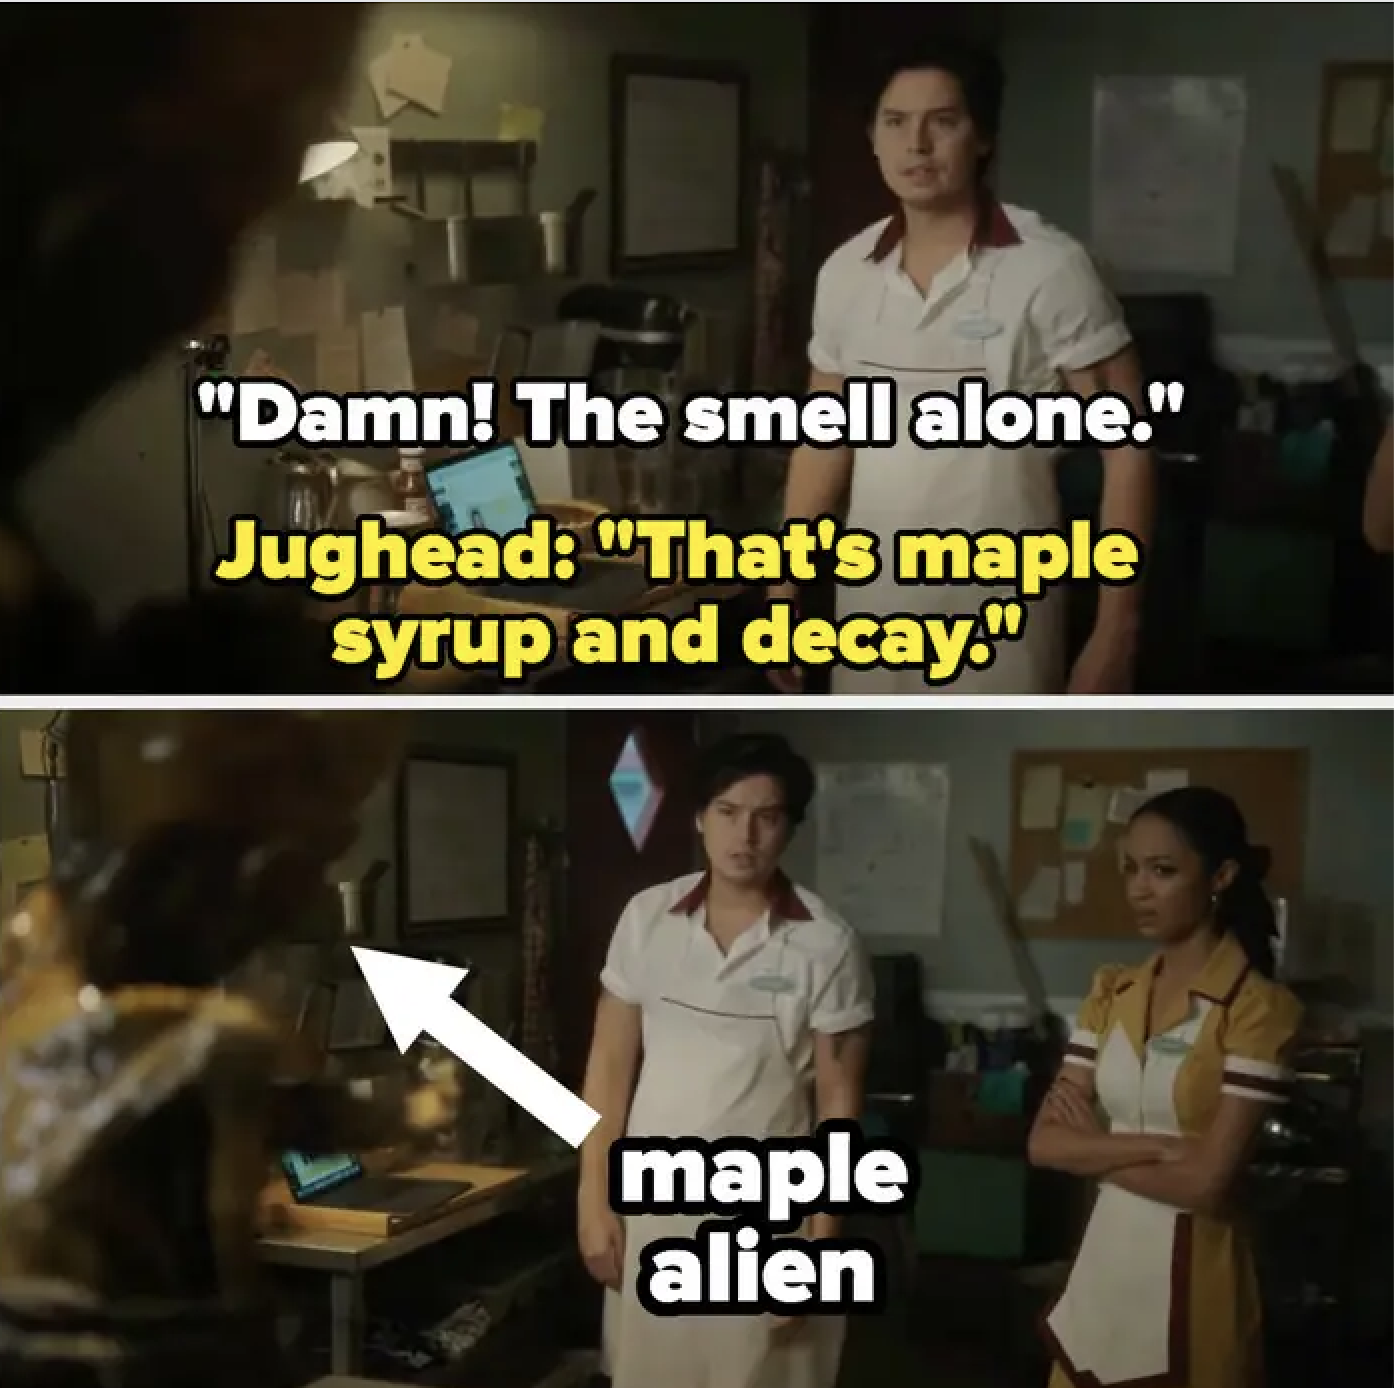 An alien in an office with Jughead and a coworker reacting